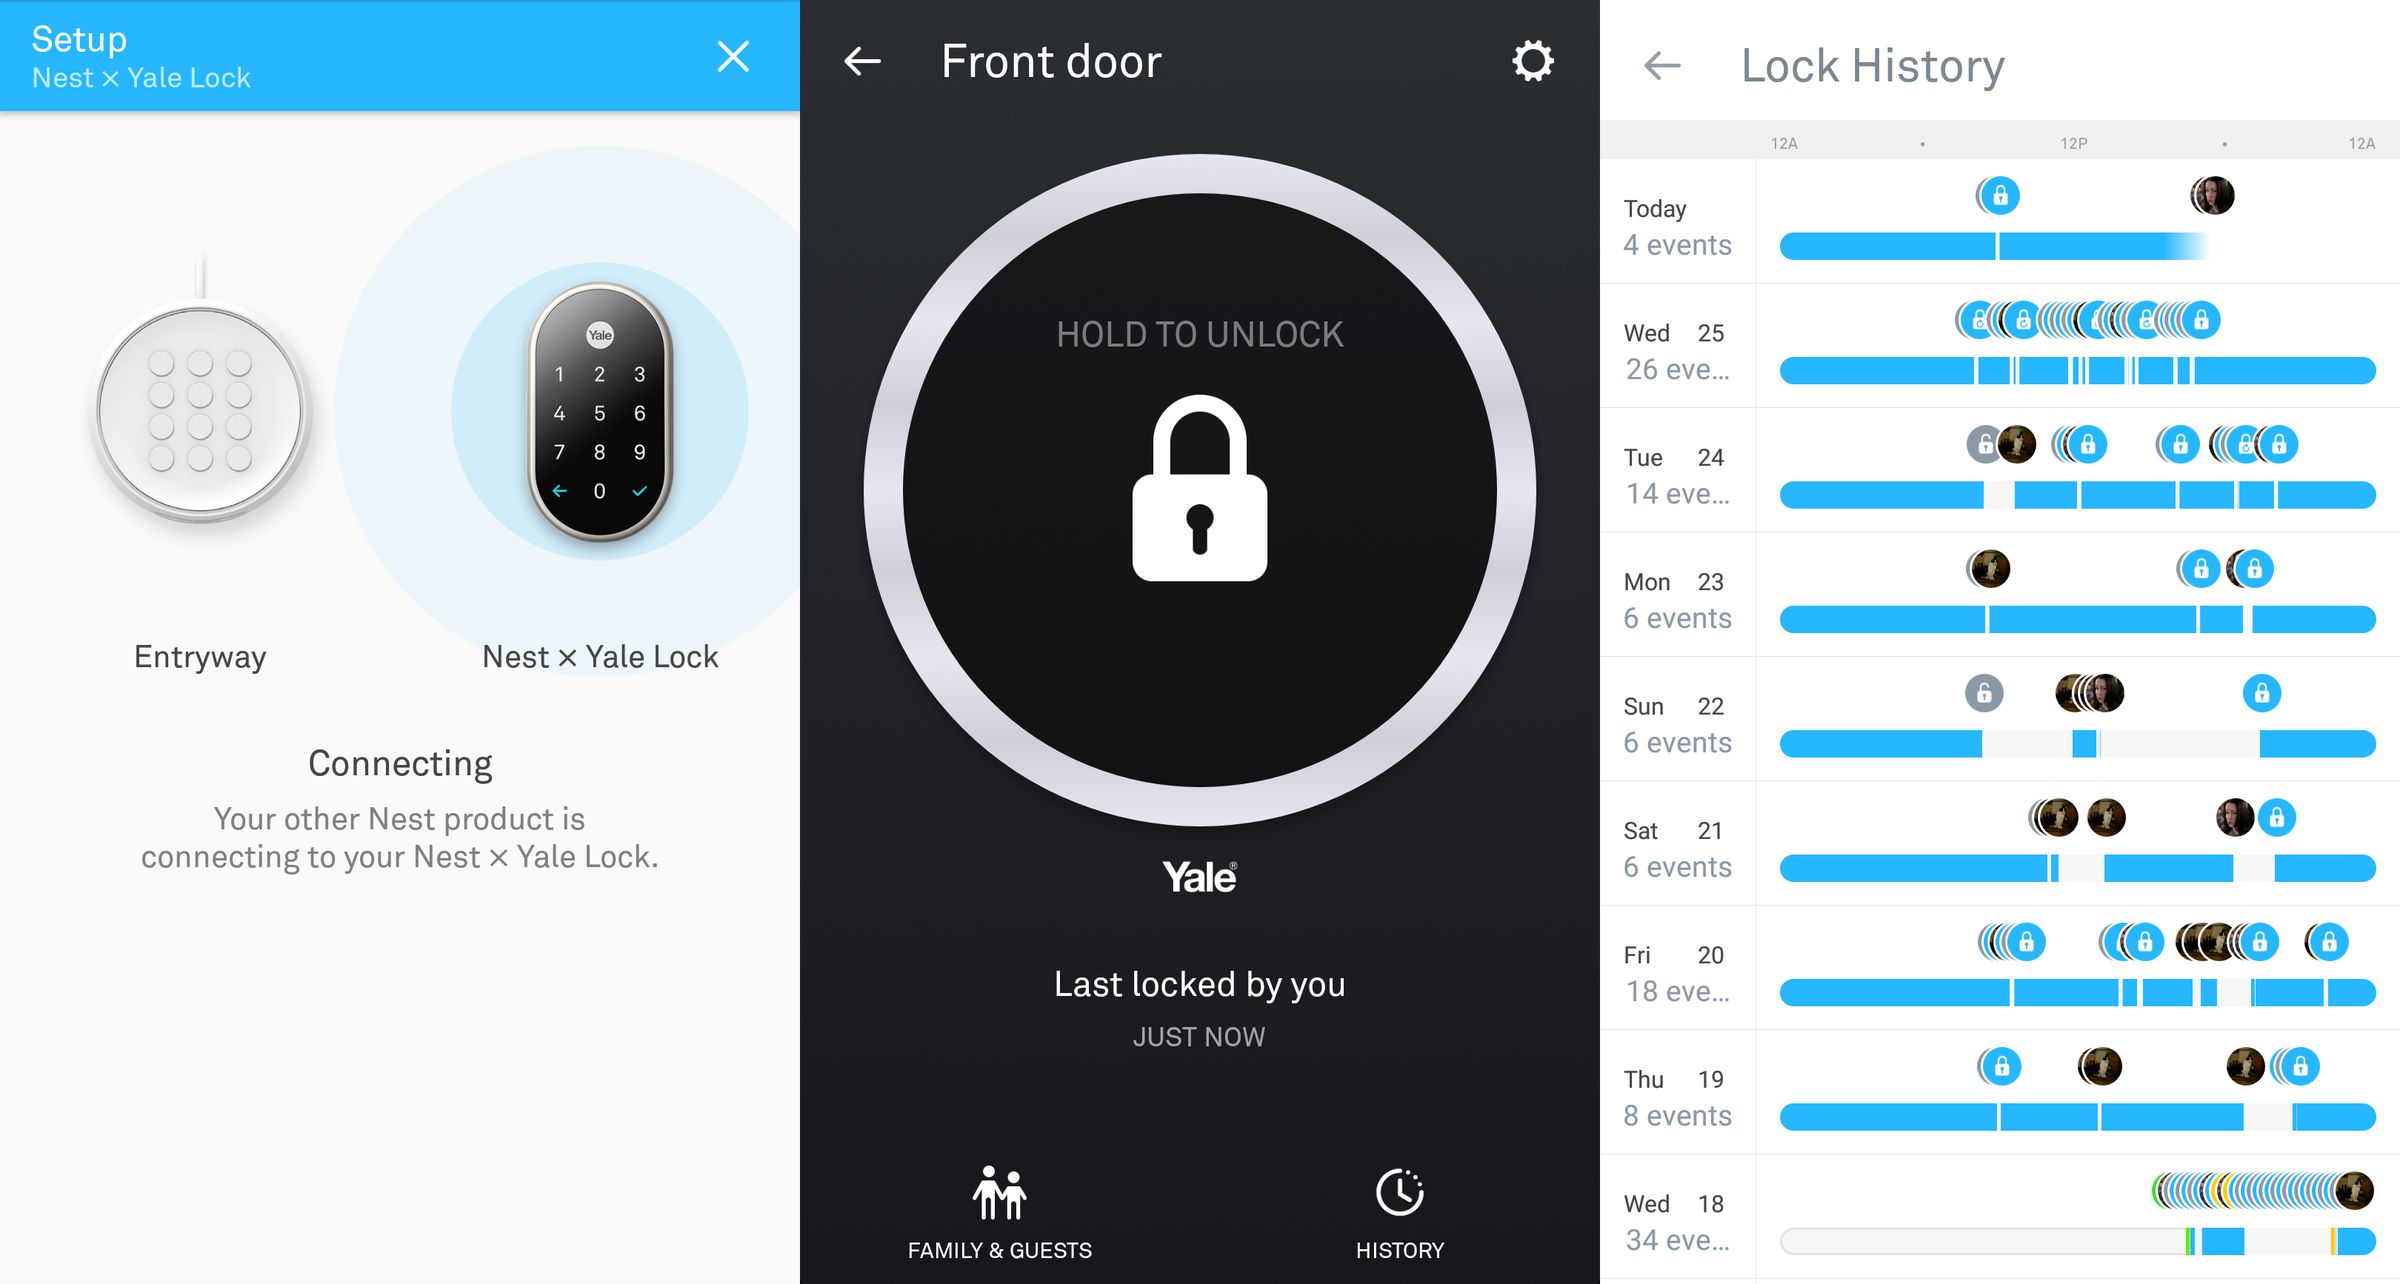 Nest’s app lets you remotely lock and unlock the Yale, as well as see a history of activity on it.